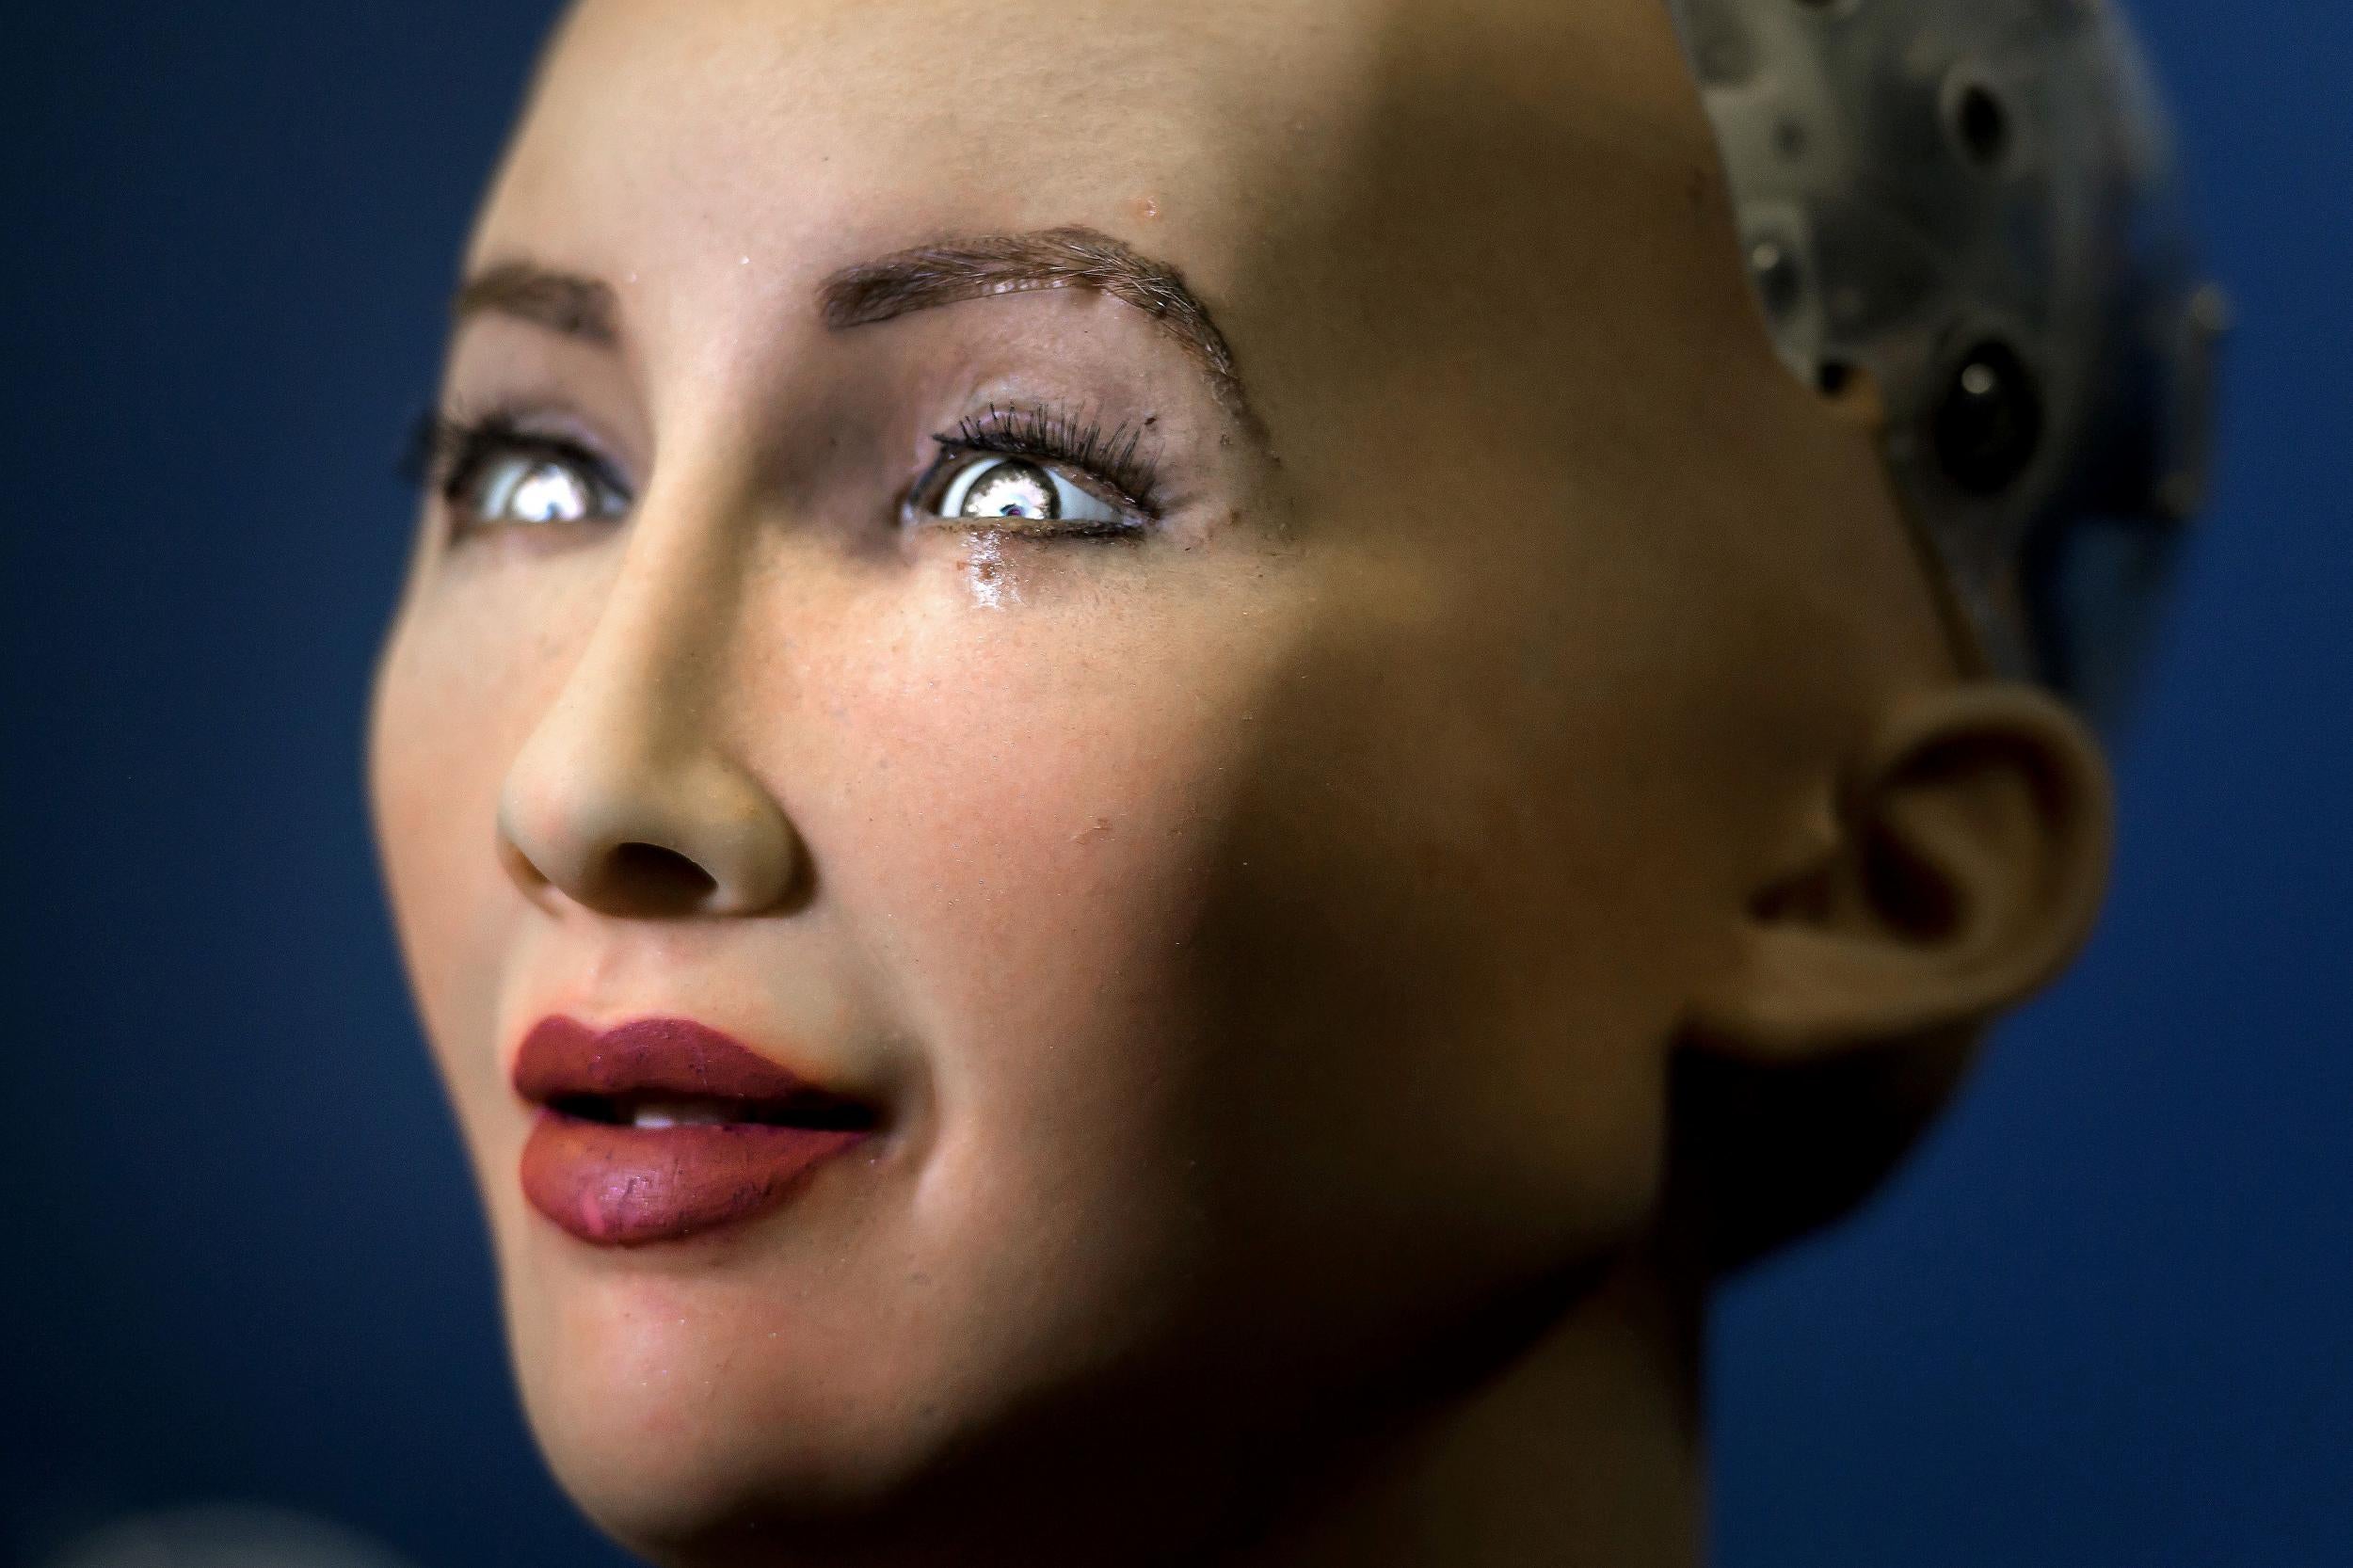 Sophia, an artificially intelligent (AI) humanoid robot, was granted citizenship in Saudi Arabia in 2017